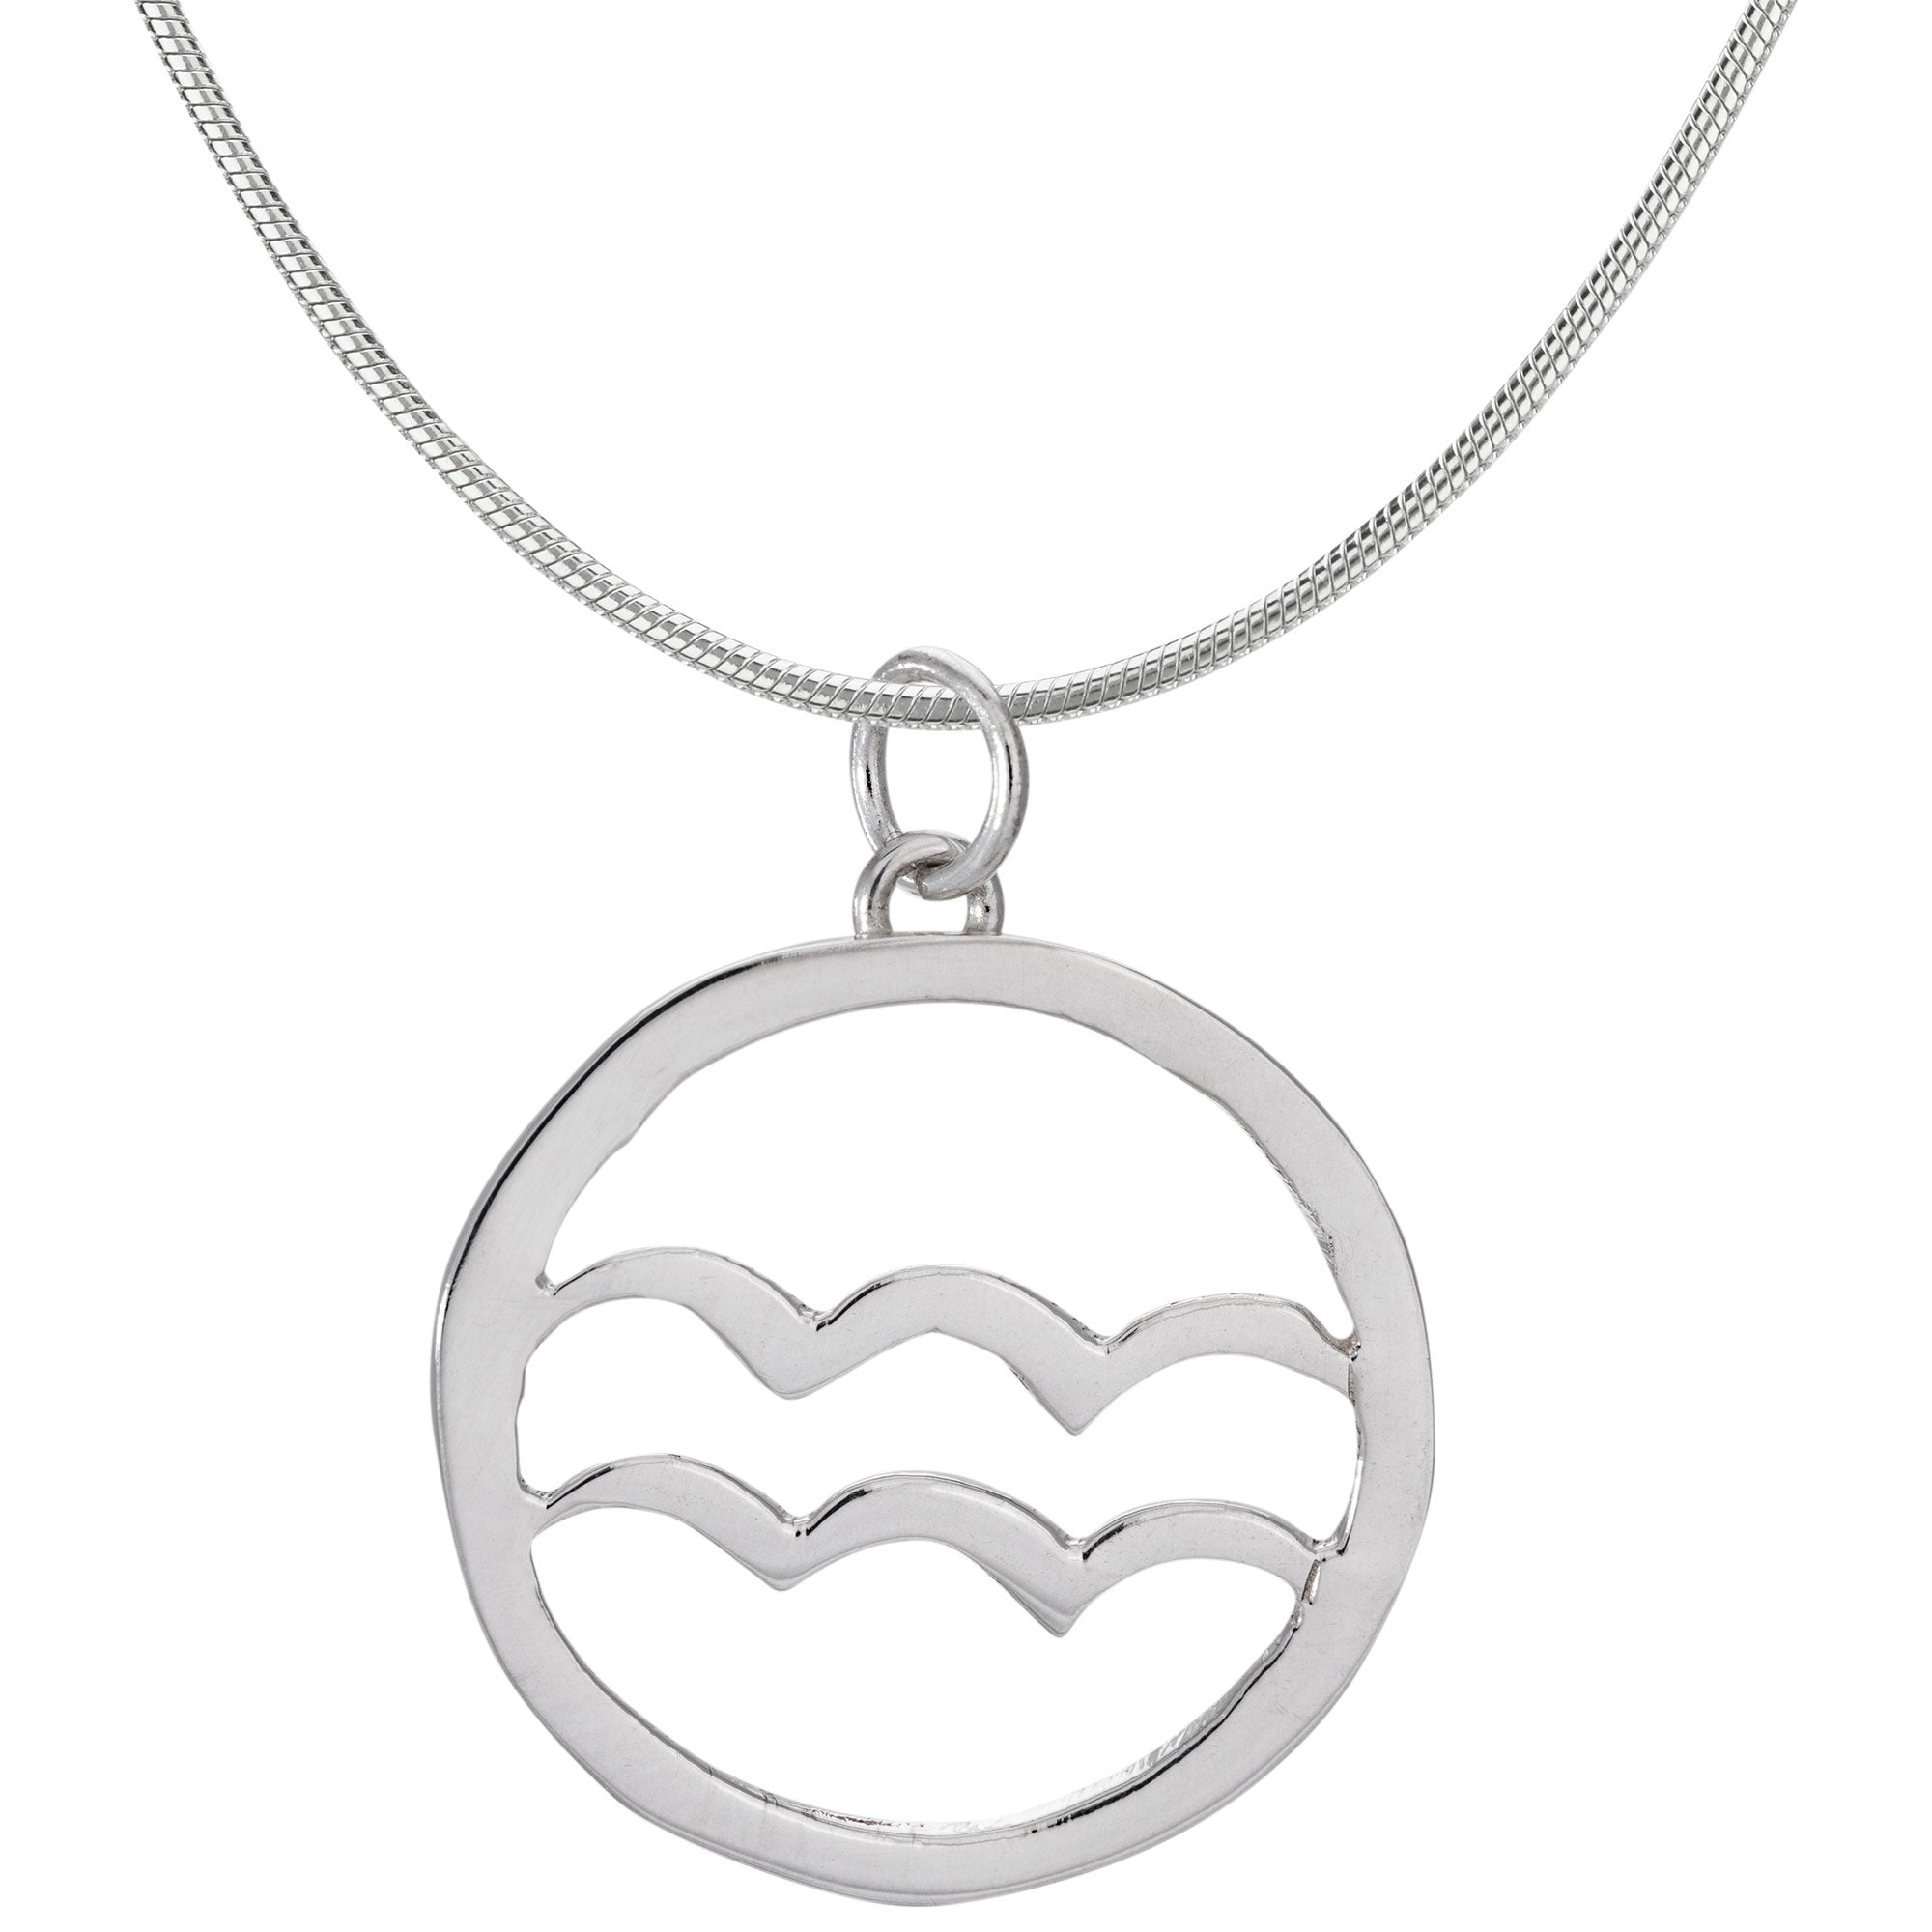 Zodiac Sign Astrology Necklace Collection - Aquarius - With Diamond Cut Chain